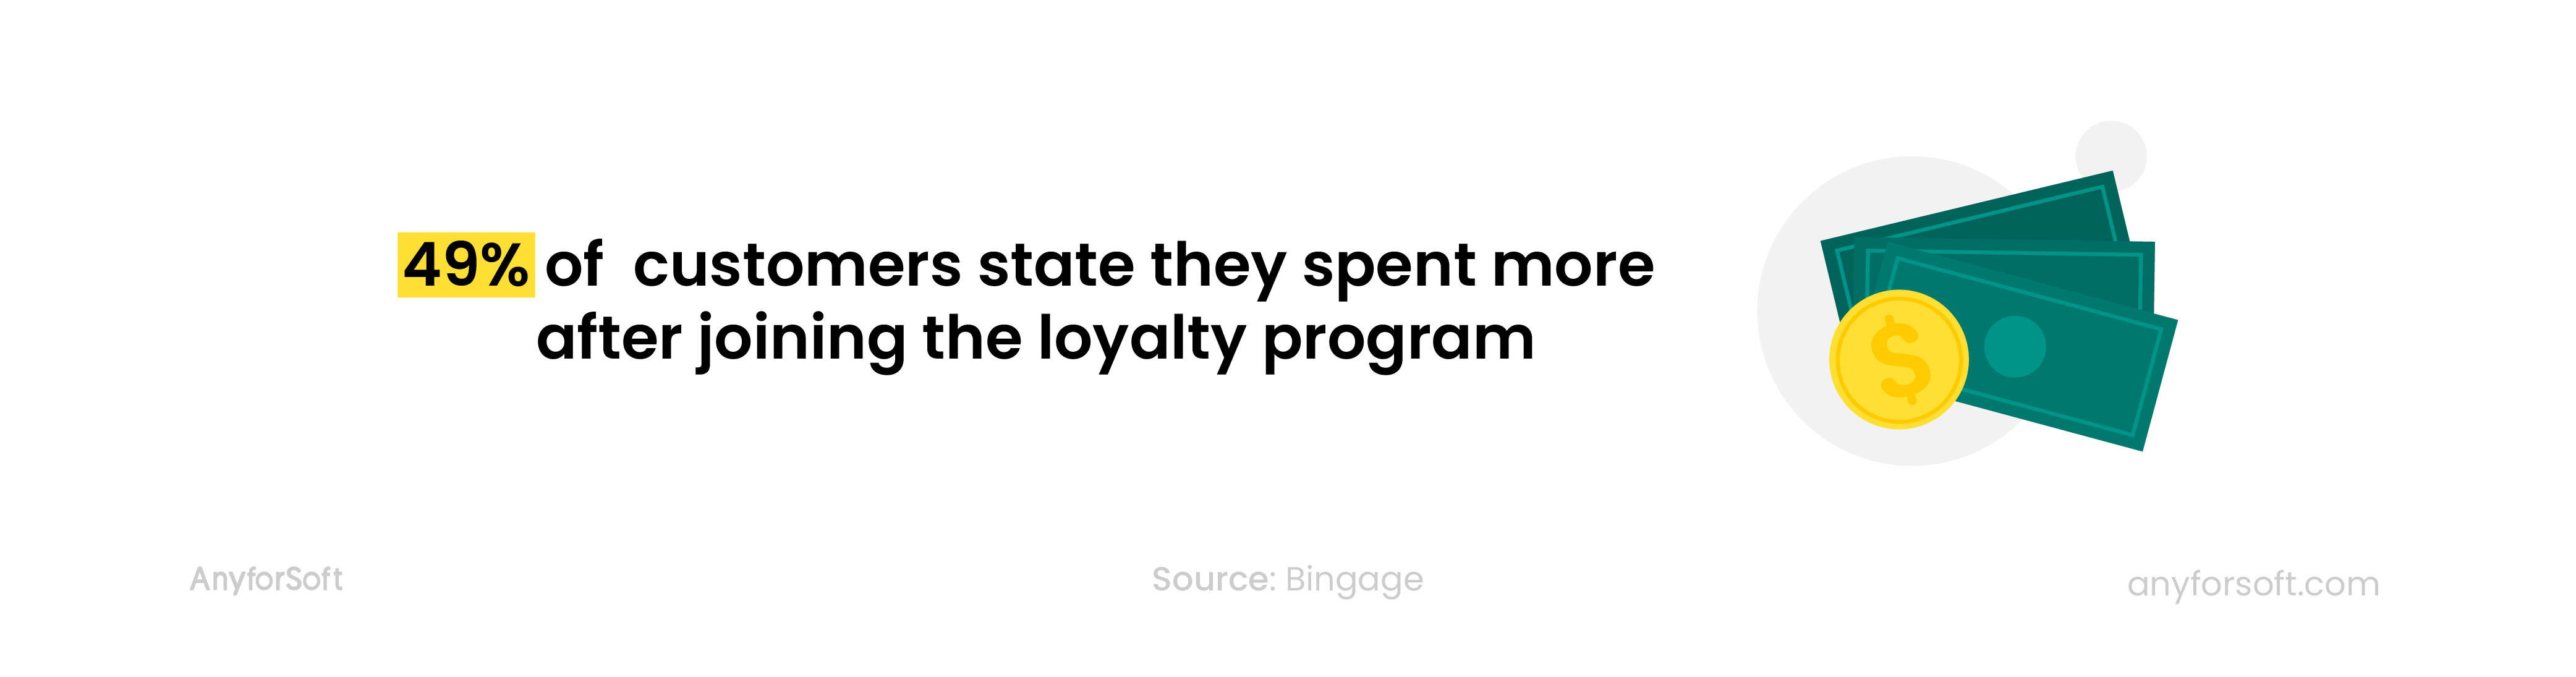 49% of customers spent more after joining loyalty programs